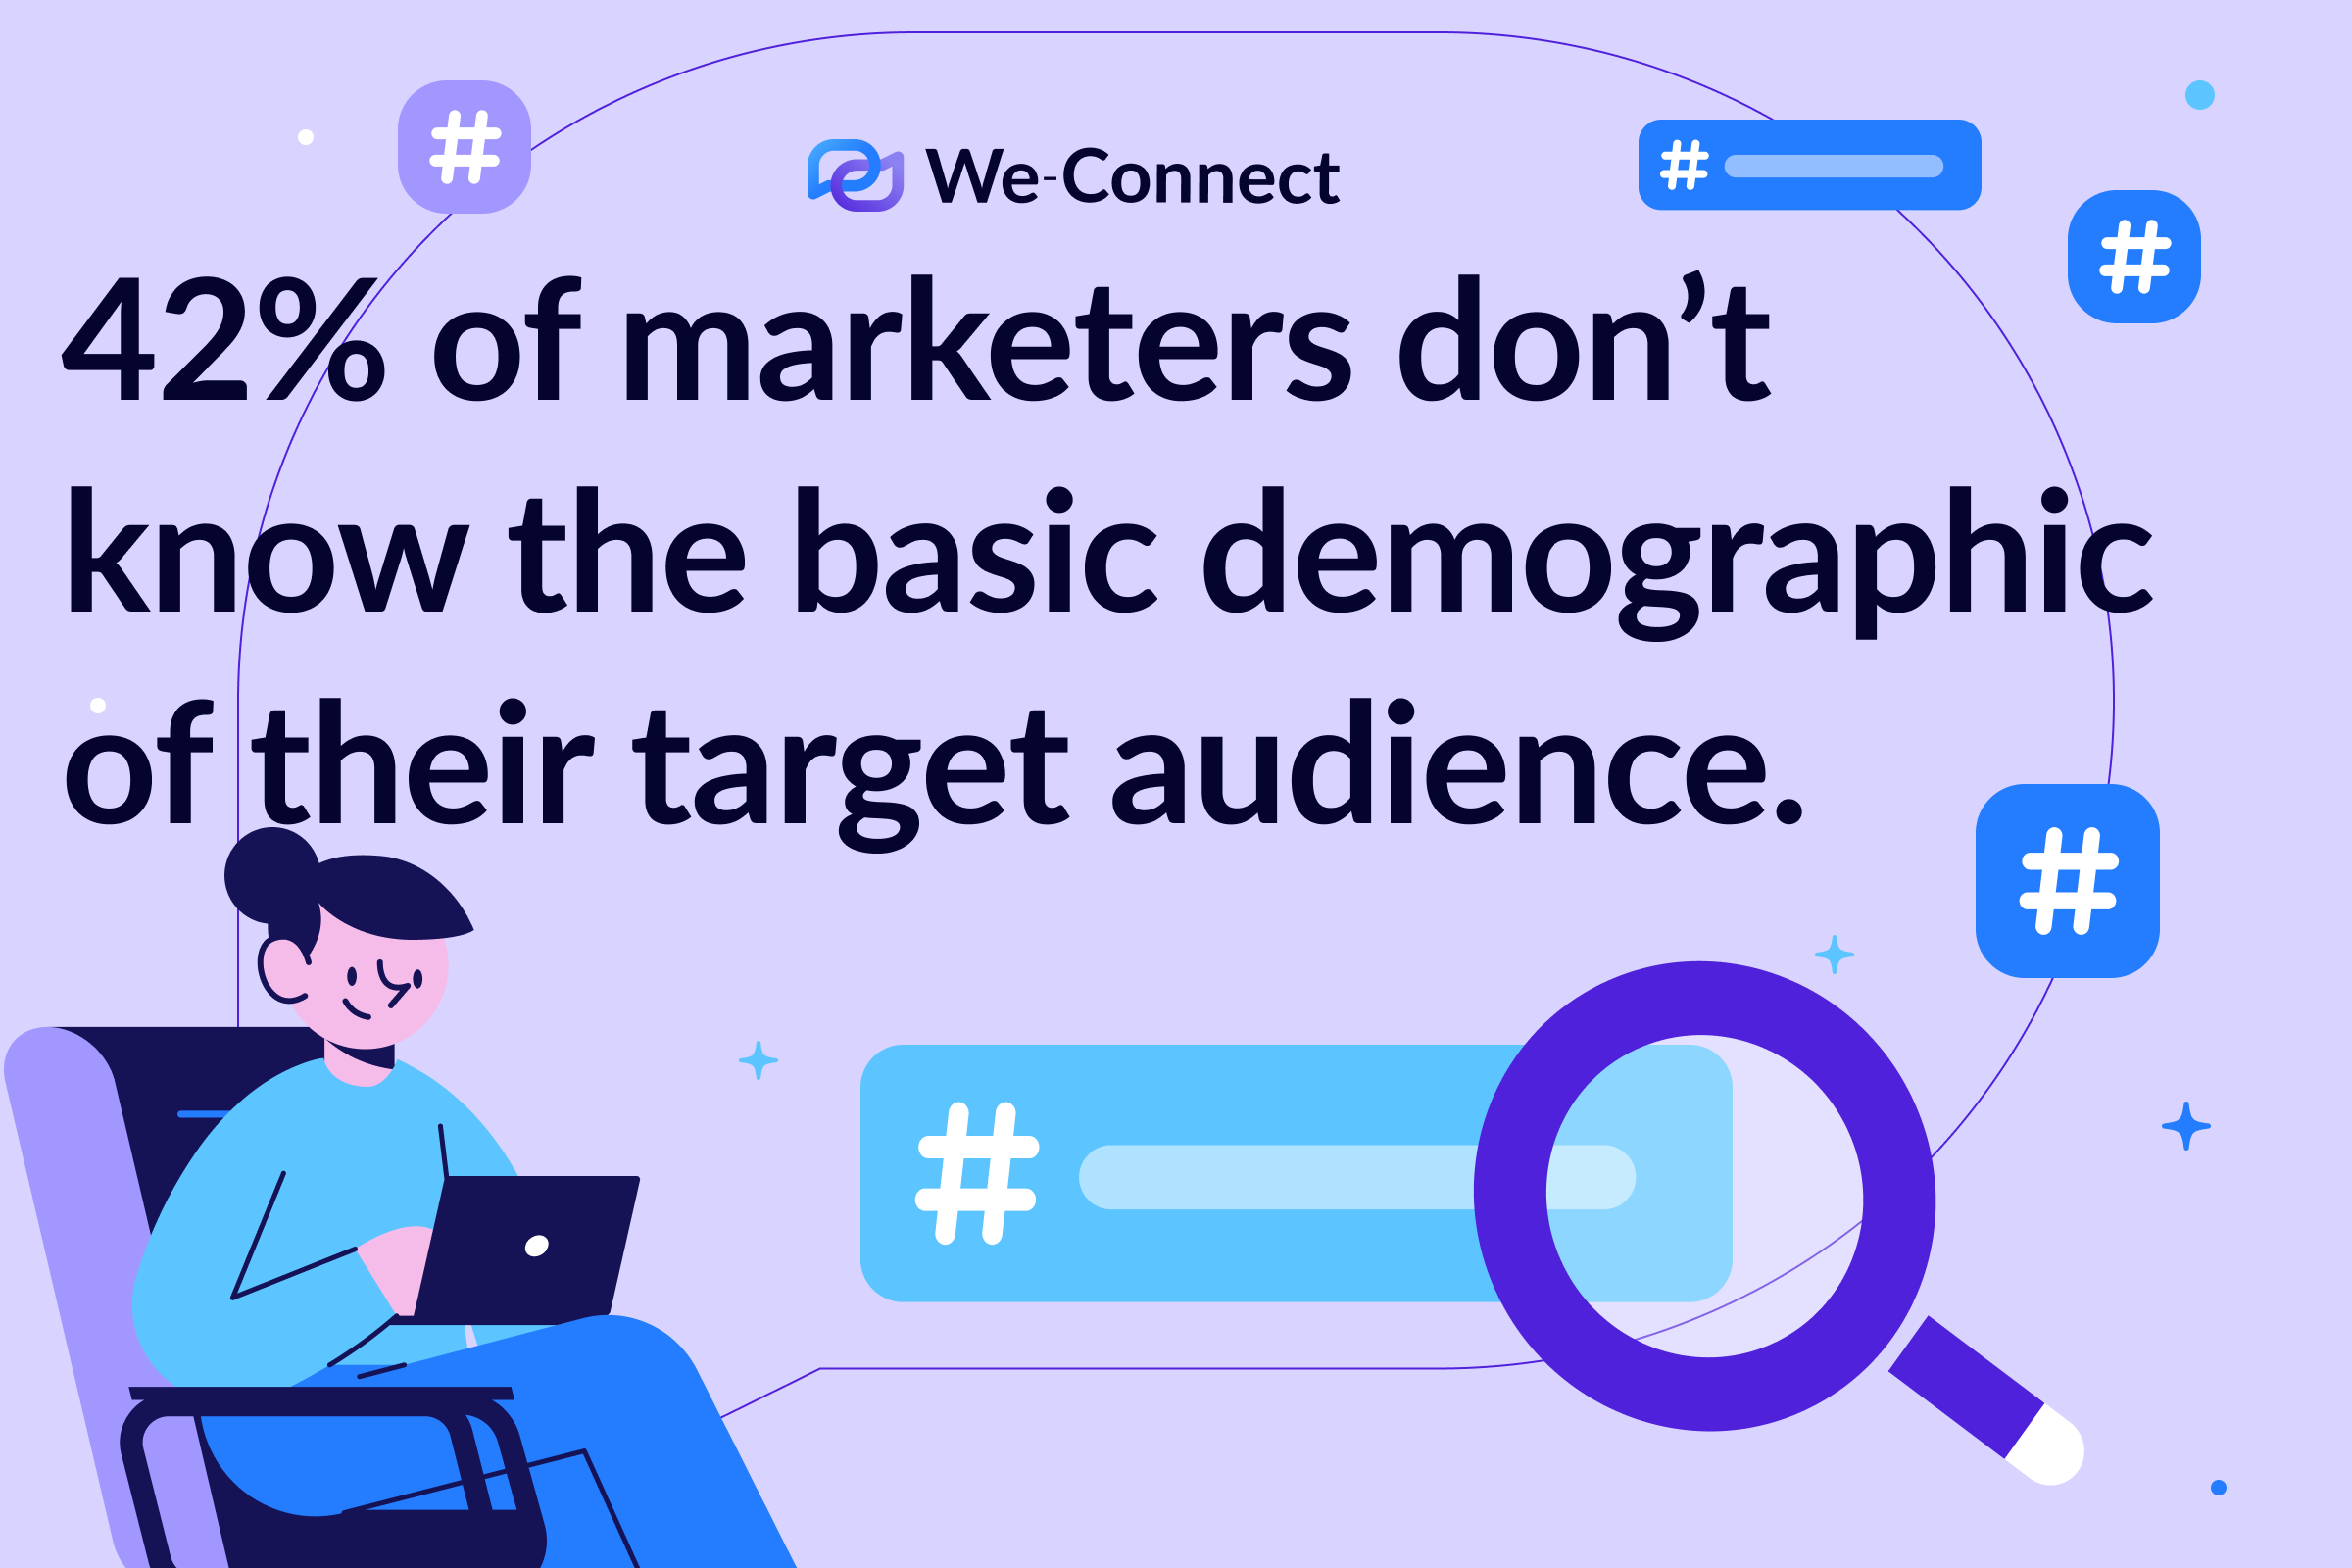 42% of marketers don’t know the basic demographic of their target audience.